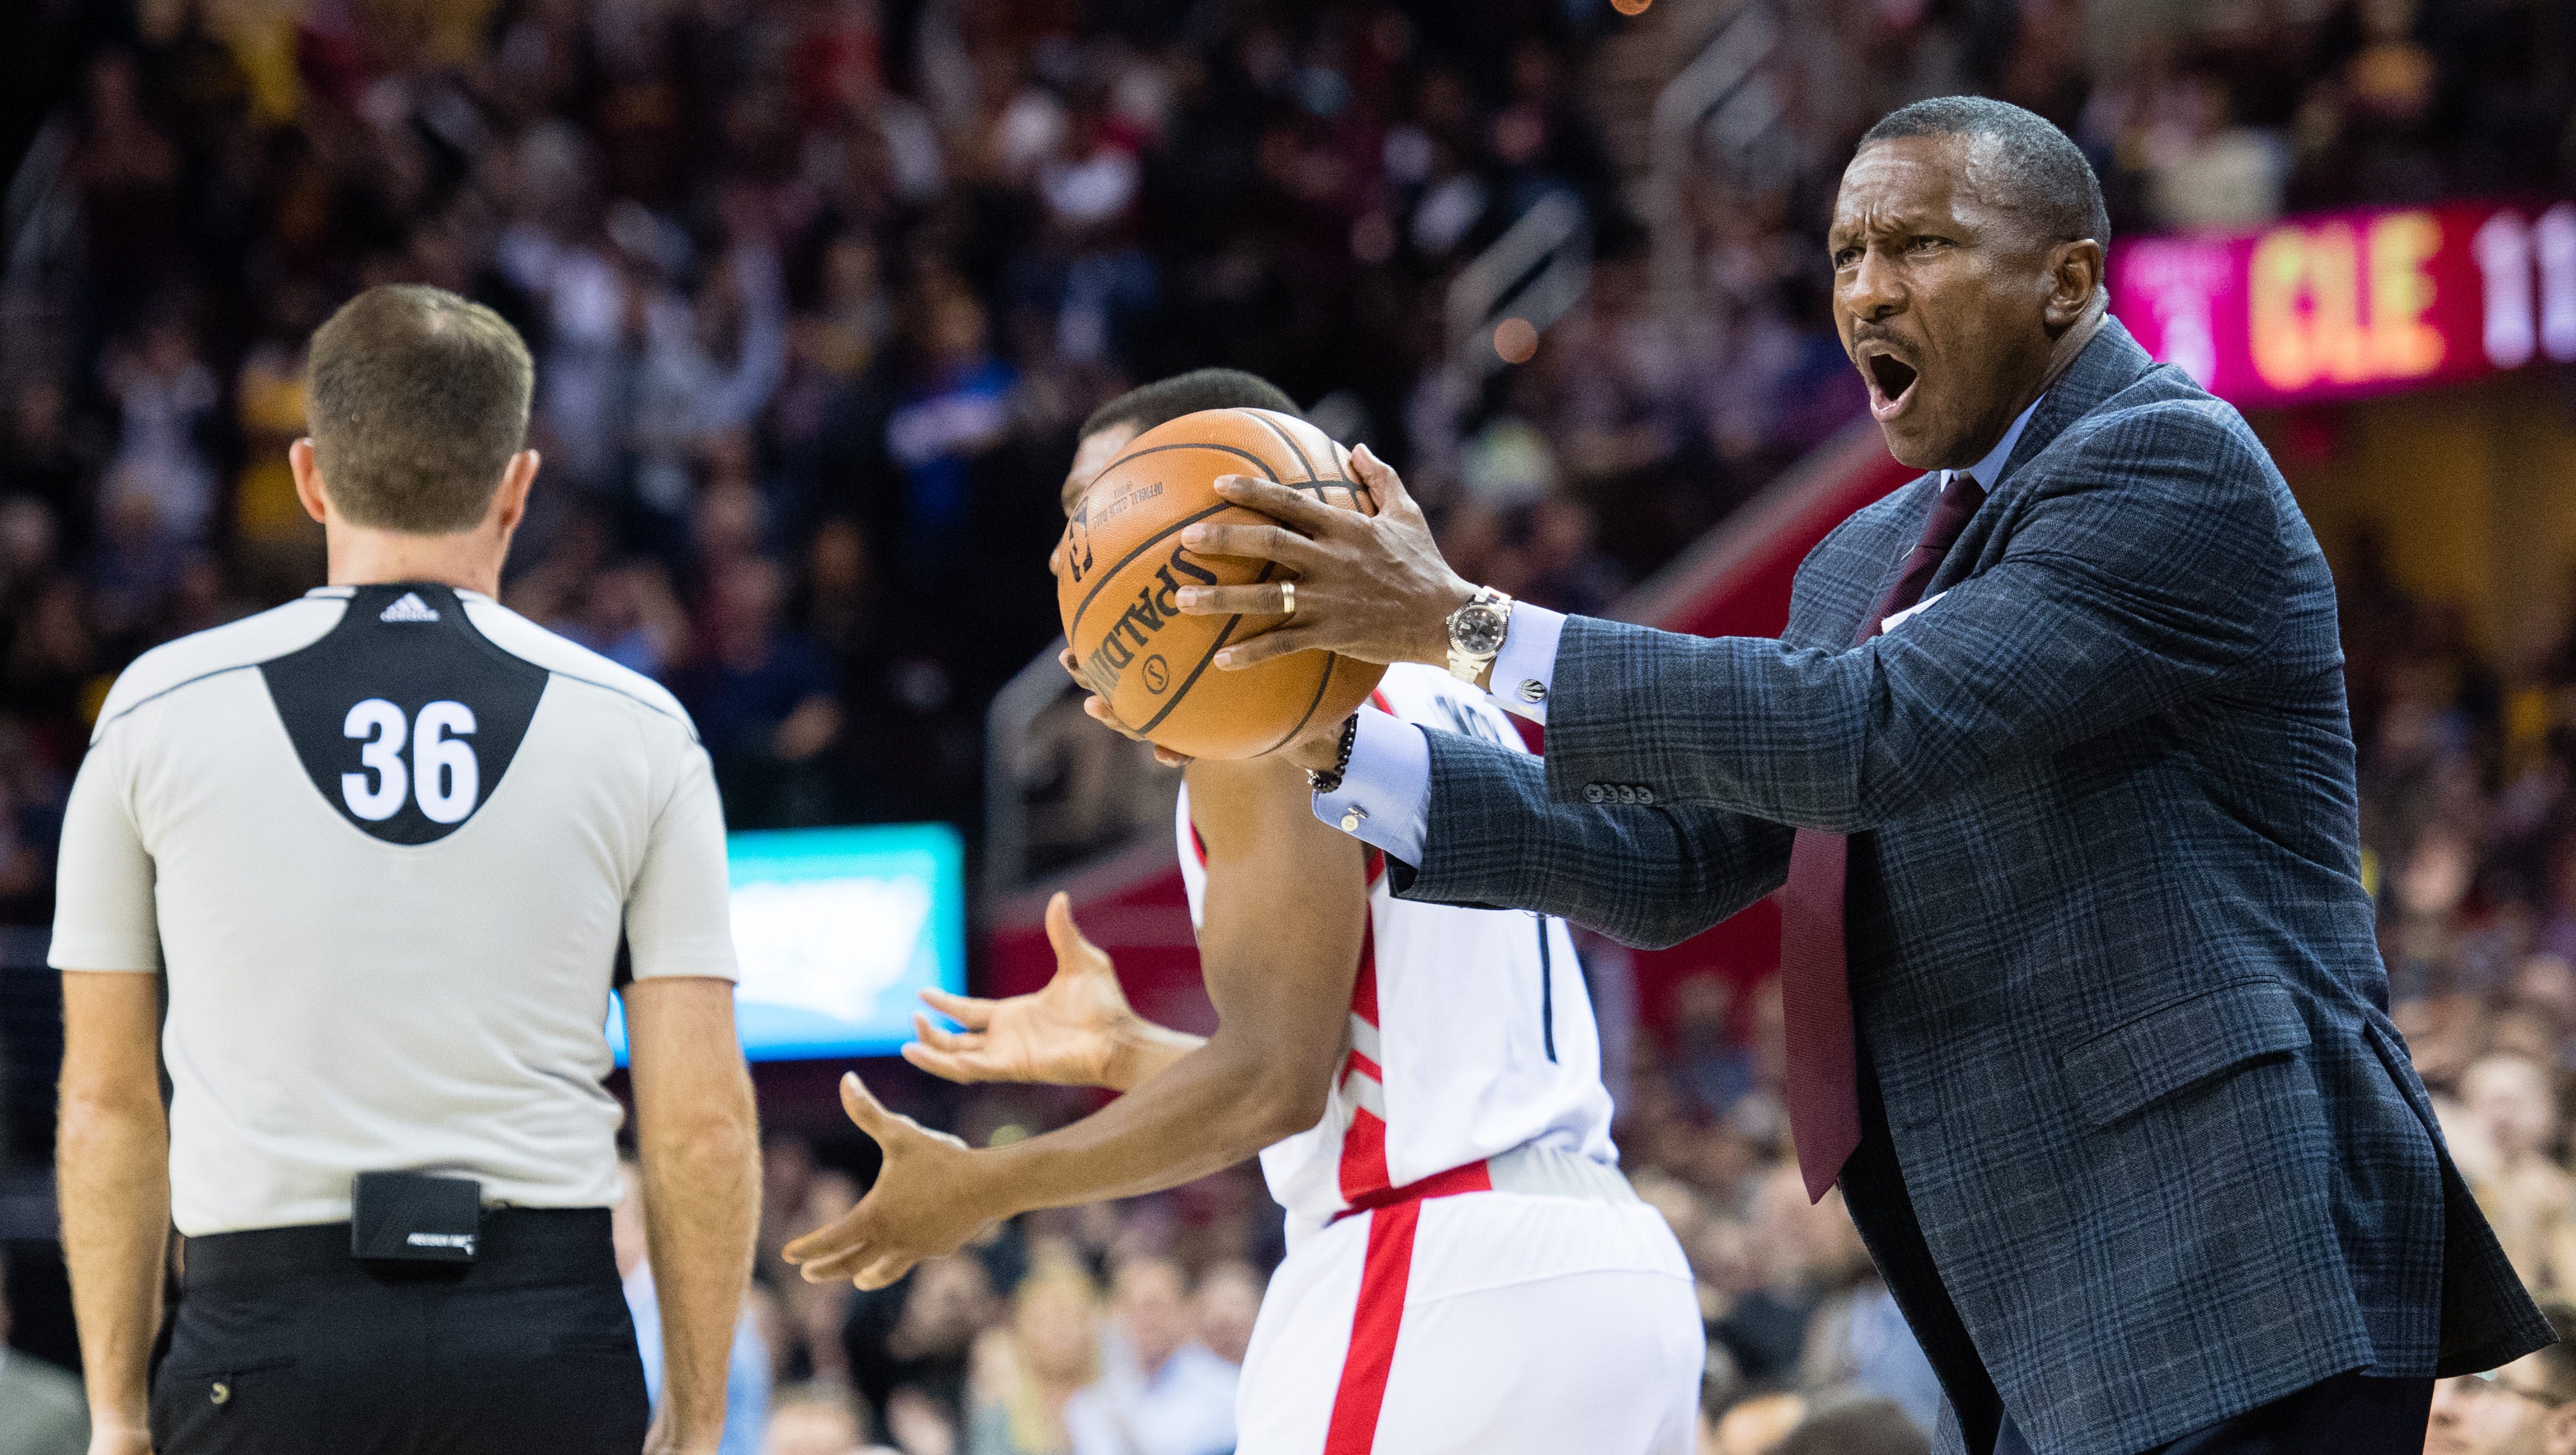 Dwane Casey of the Toronto Raptors reacts to a call during the second half against the Cleveland Cavaliers at Quicken Loans Arena on November 15, 2016 in Cleveland, Ohio.